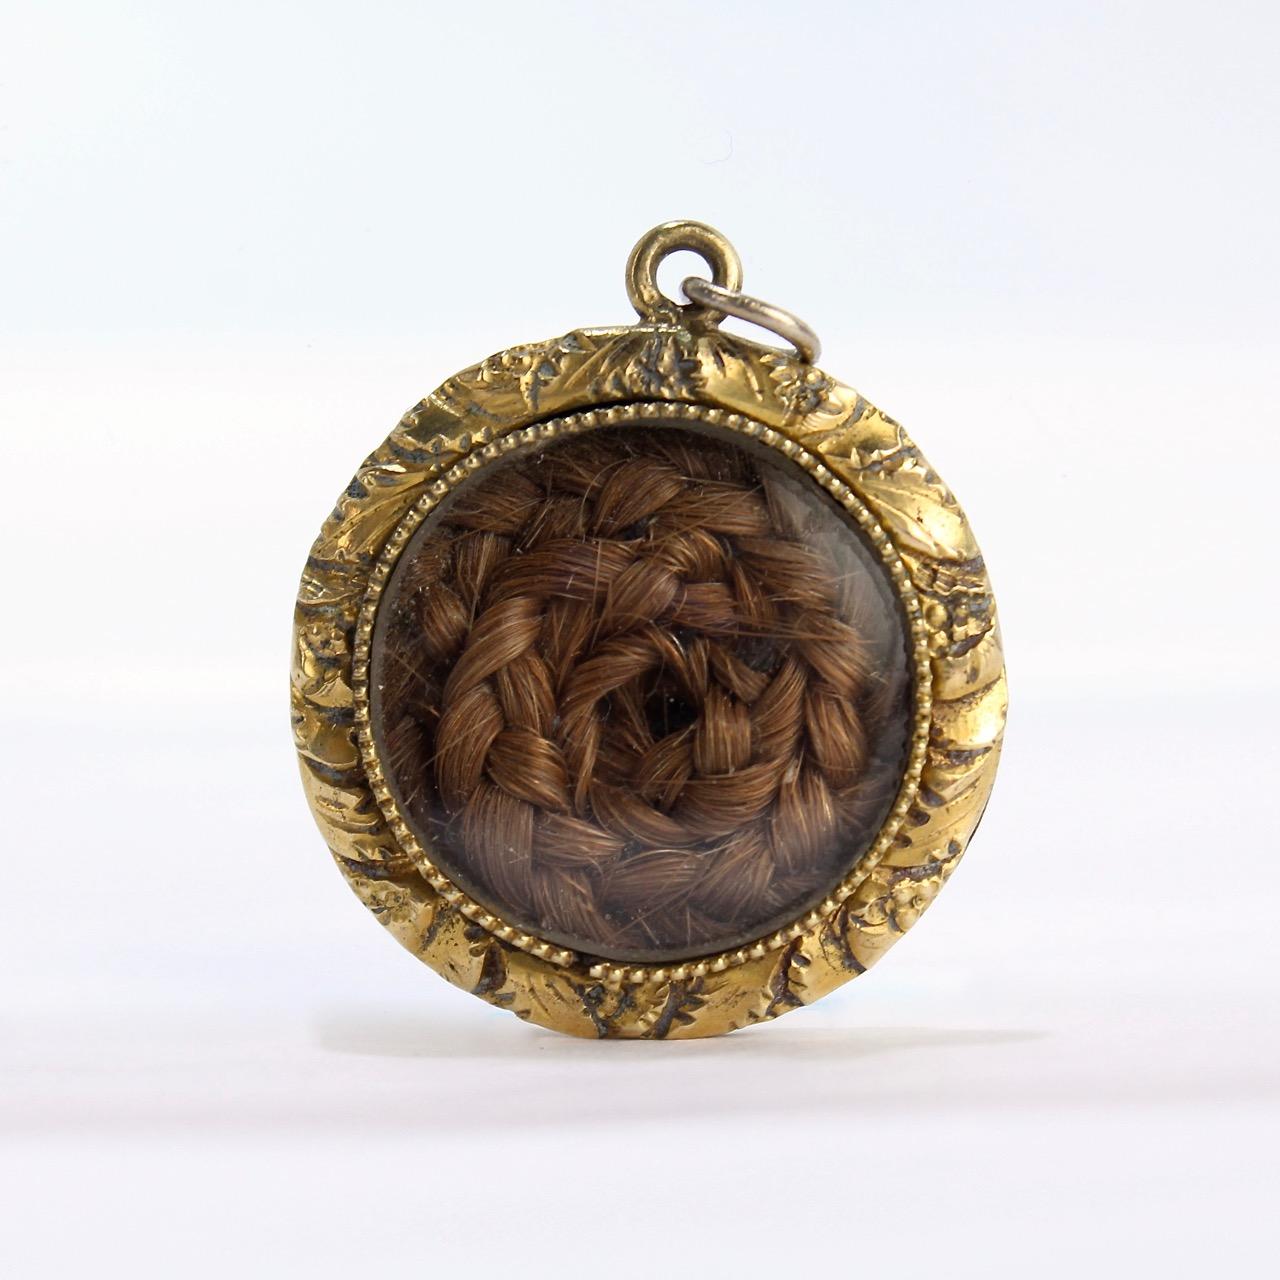 A fine late Georgian or early Victorian memorial gold-filled pendant with woven hair.

With a coil of braided hair set behind glass in a filigree-worked gold-filled pendant setting.

A rare form indeed!

In the Georgian and Victorian eras, woven